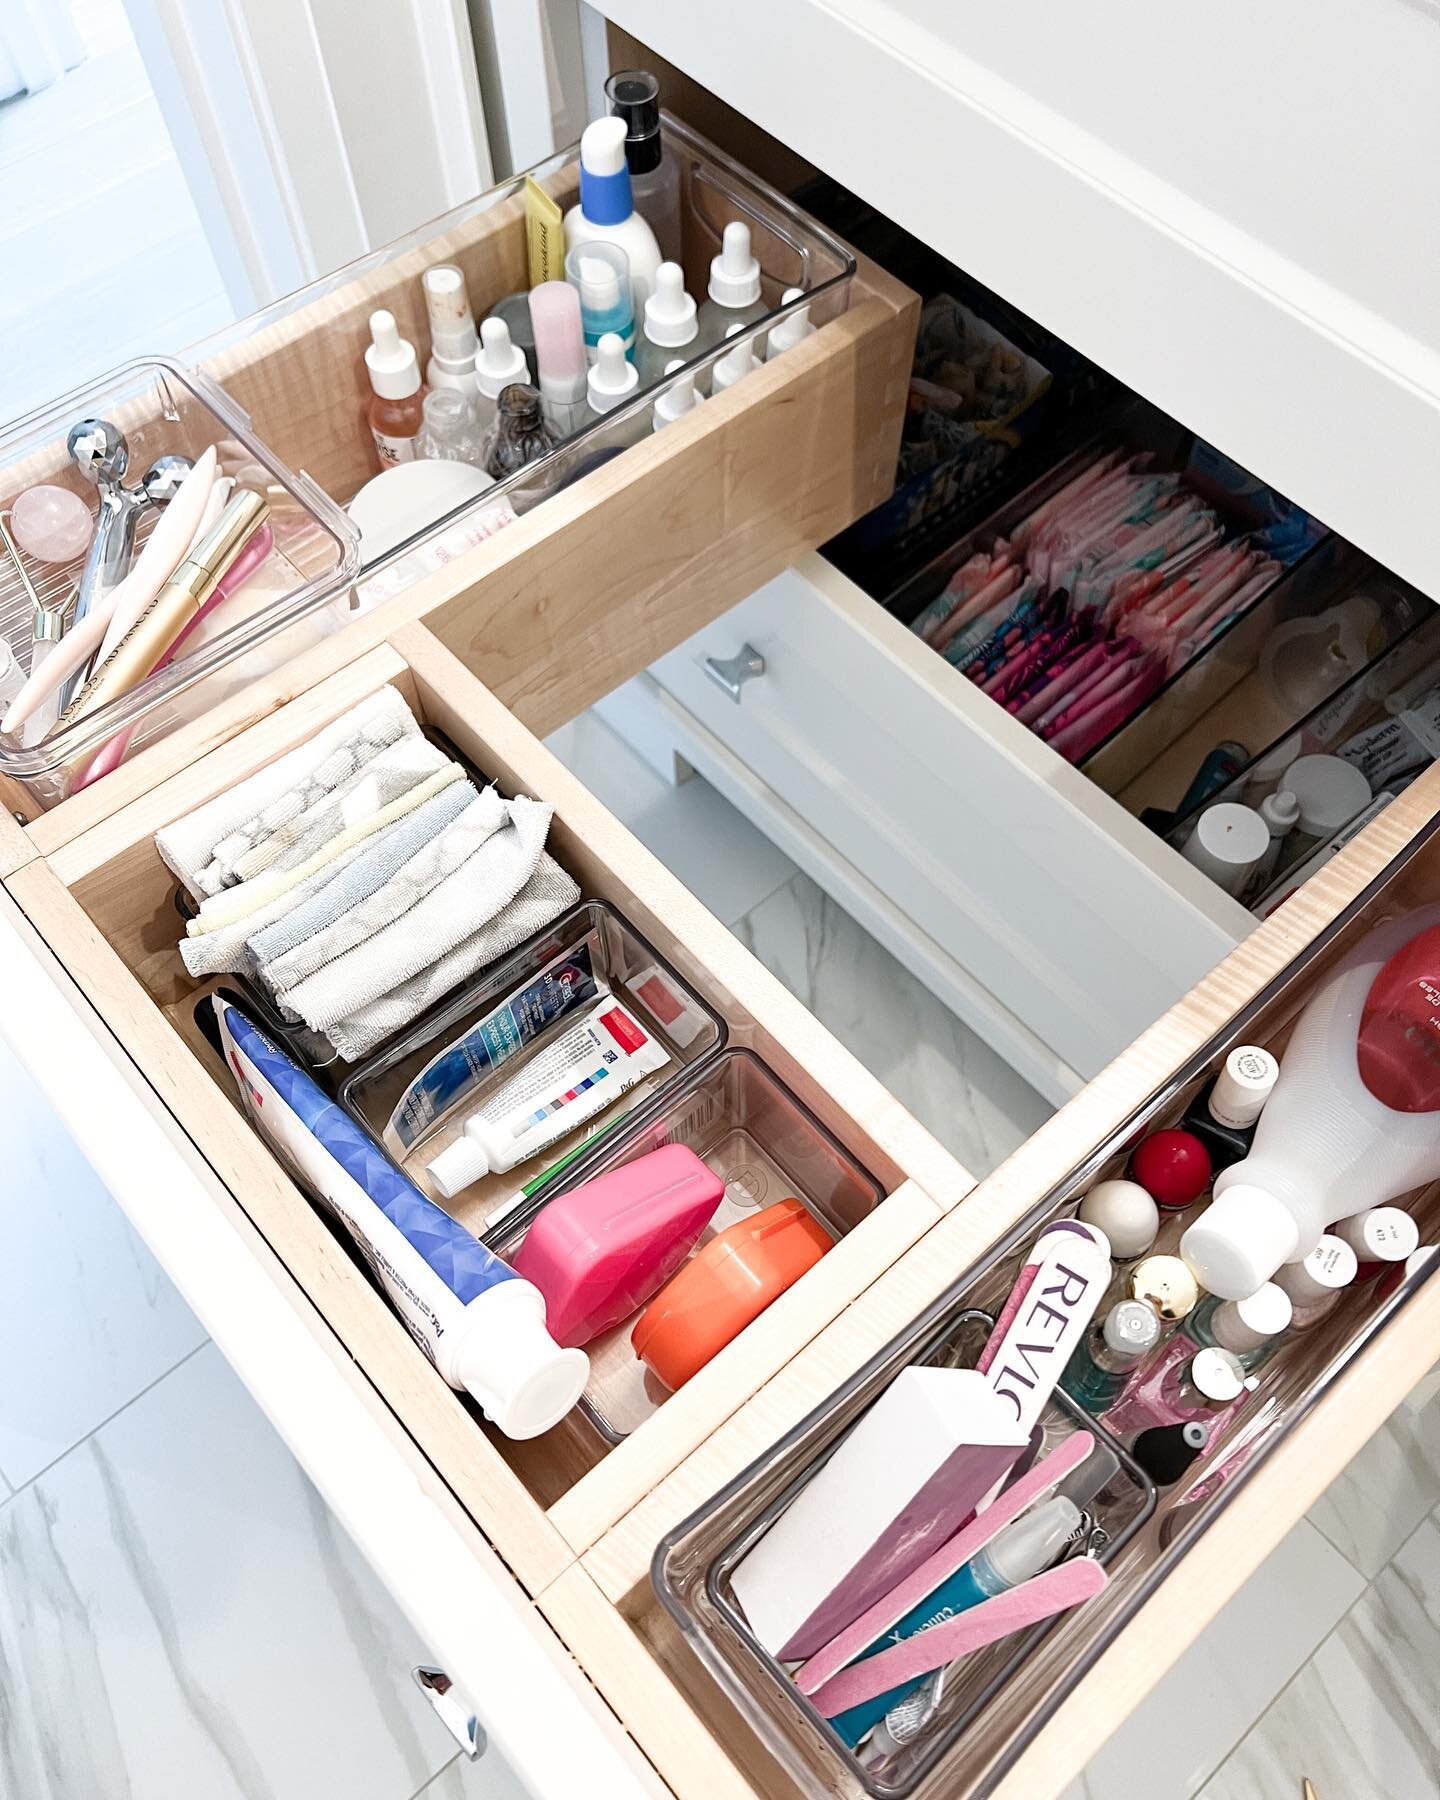 This is what BATHROOM dreams are made of! 
⠀⠀⠀⠀⠀⠀⠀⠀⠀
This drawer had nice divided spaces, but we divided them even further with bins, which also helps to keep smaller items from sliding around. 
⠀⠀⠀⠀⠀⠀⠀⠀⠀
After a quick declutter, all of the items in 